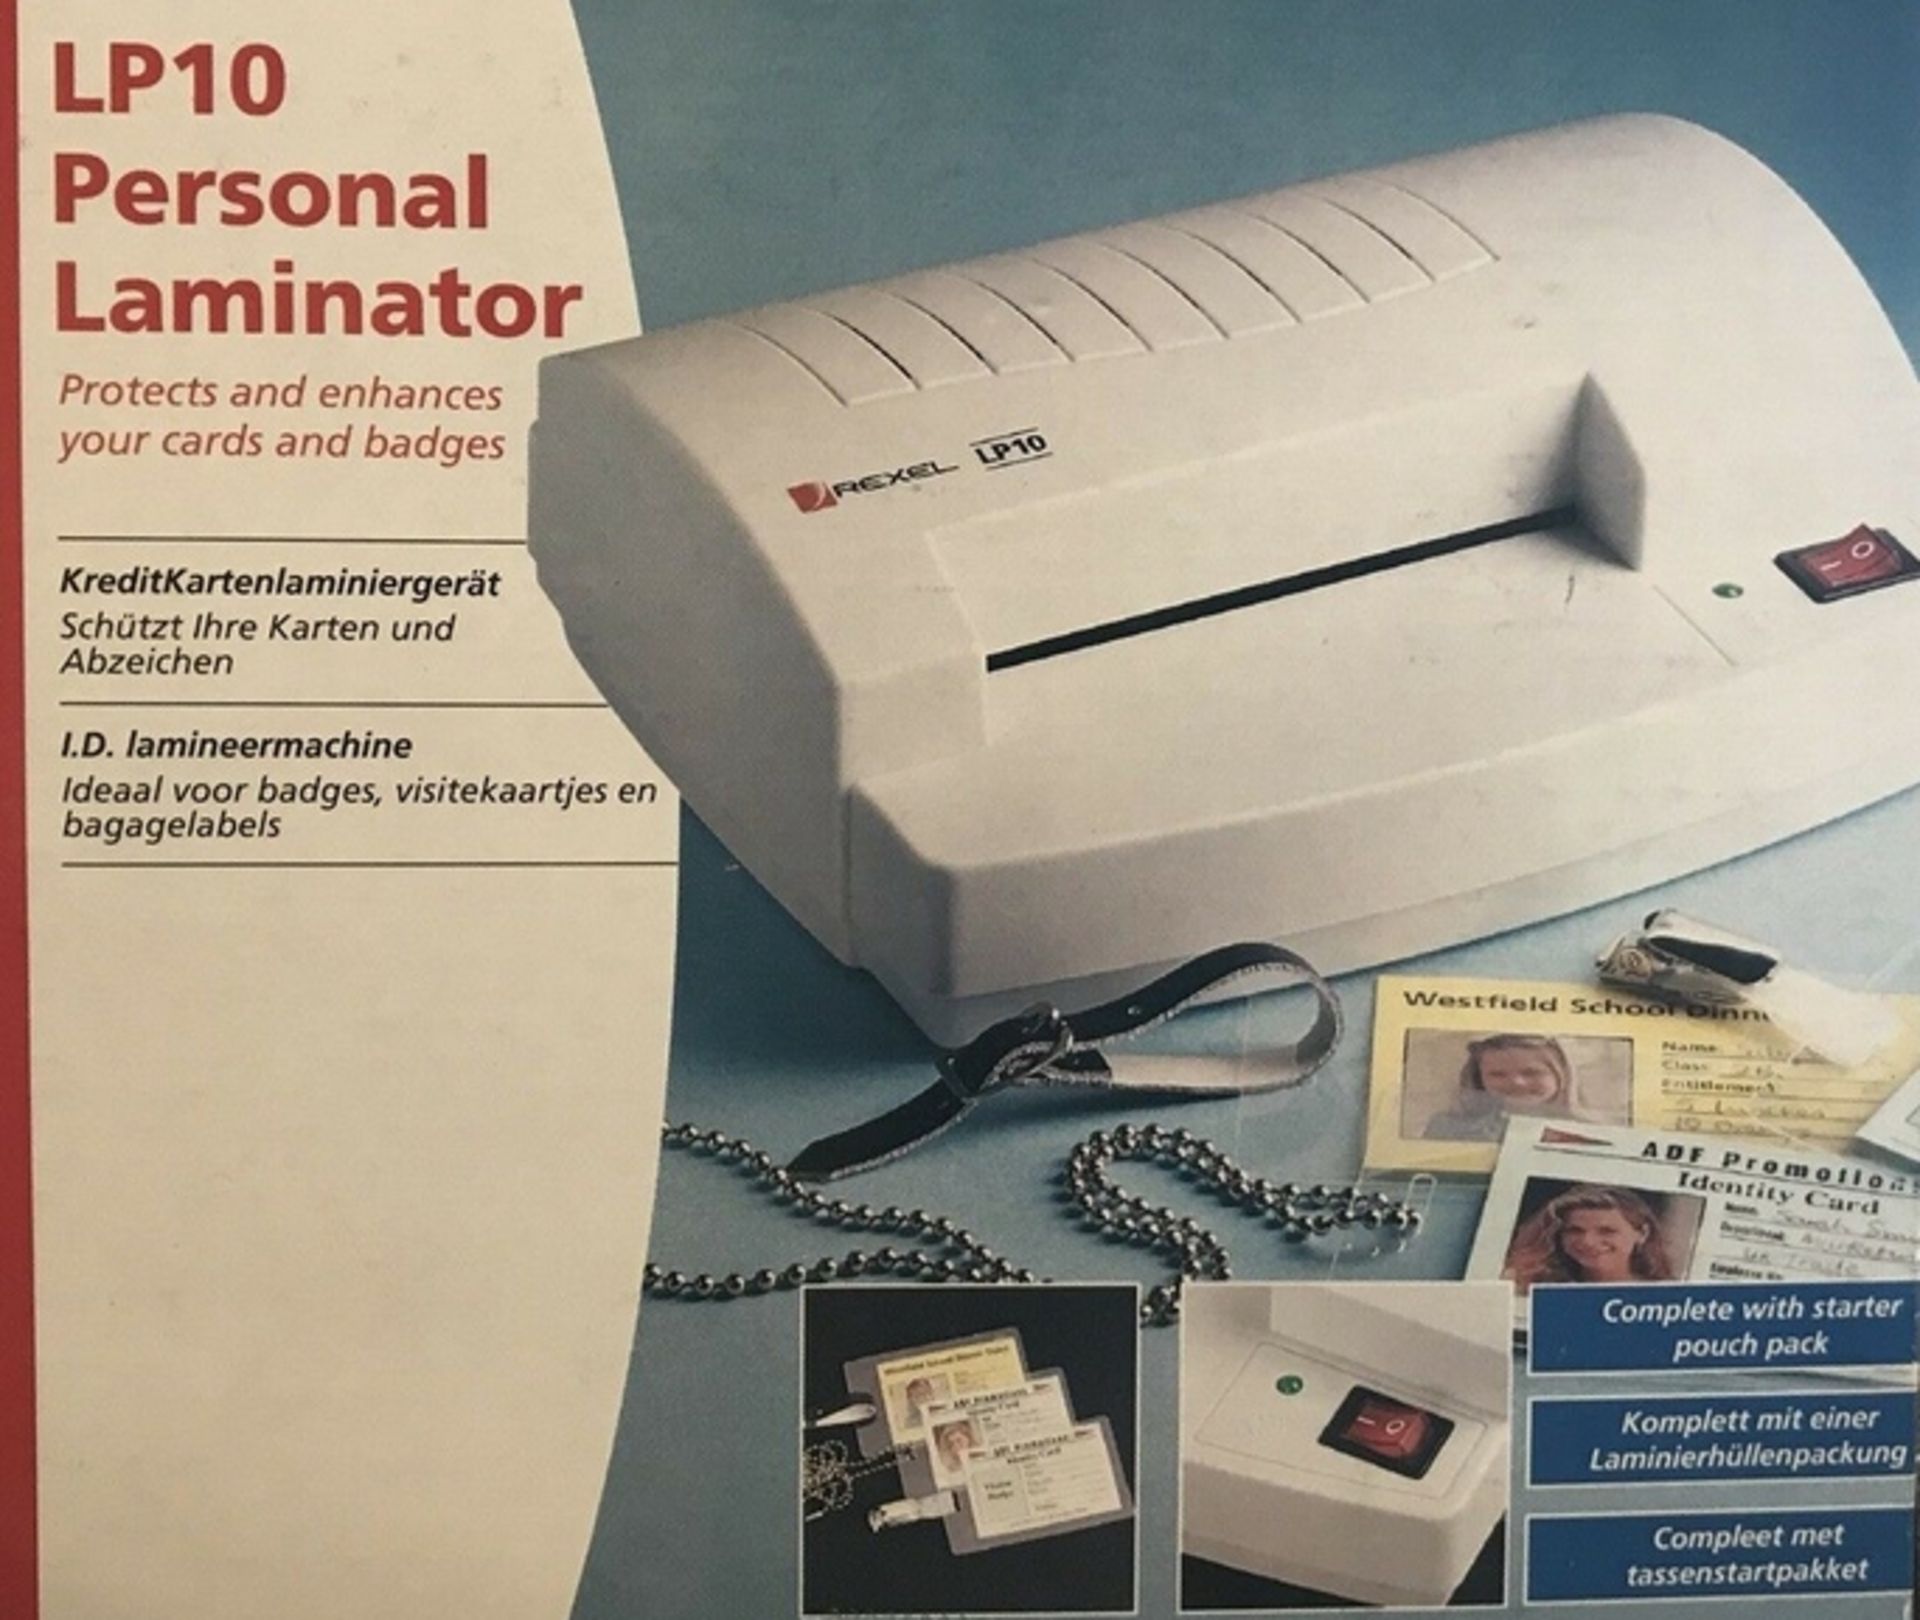 Rexel Personal Laminator Lp10 With 5 Packs - Image 2 of 3